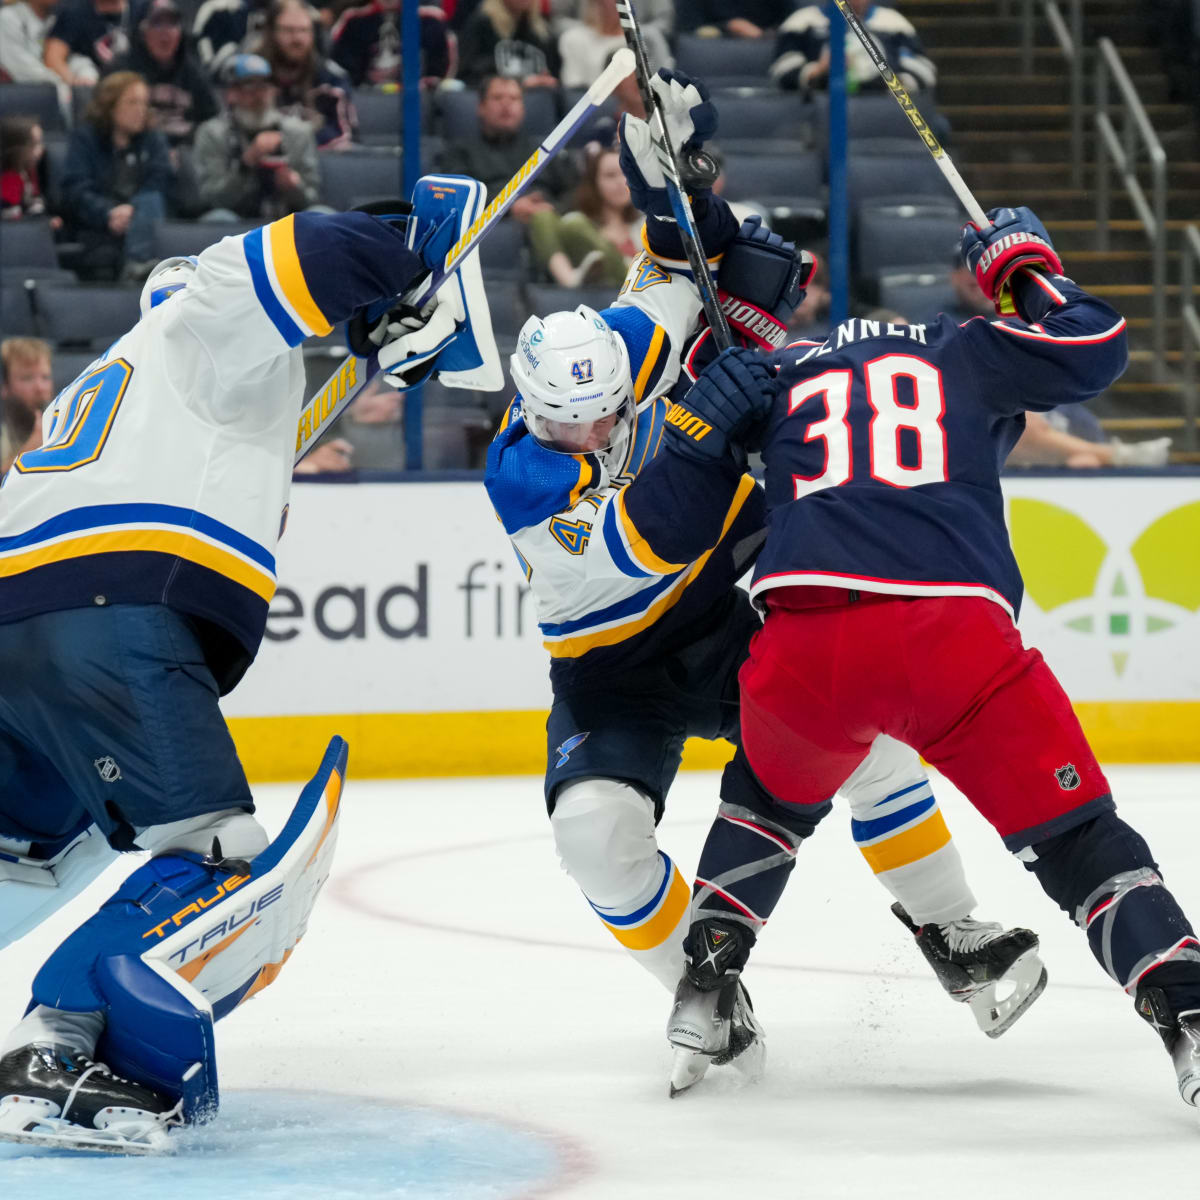 St. Louis Blues captain Justin Faulk delivers a bone-crunching hit to  Columbus Blue Jackets forward Yegor Chinakov on February 23, 2025, sending  Chinakov to the ground unconscious and injured. Faulk was ejected